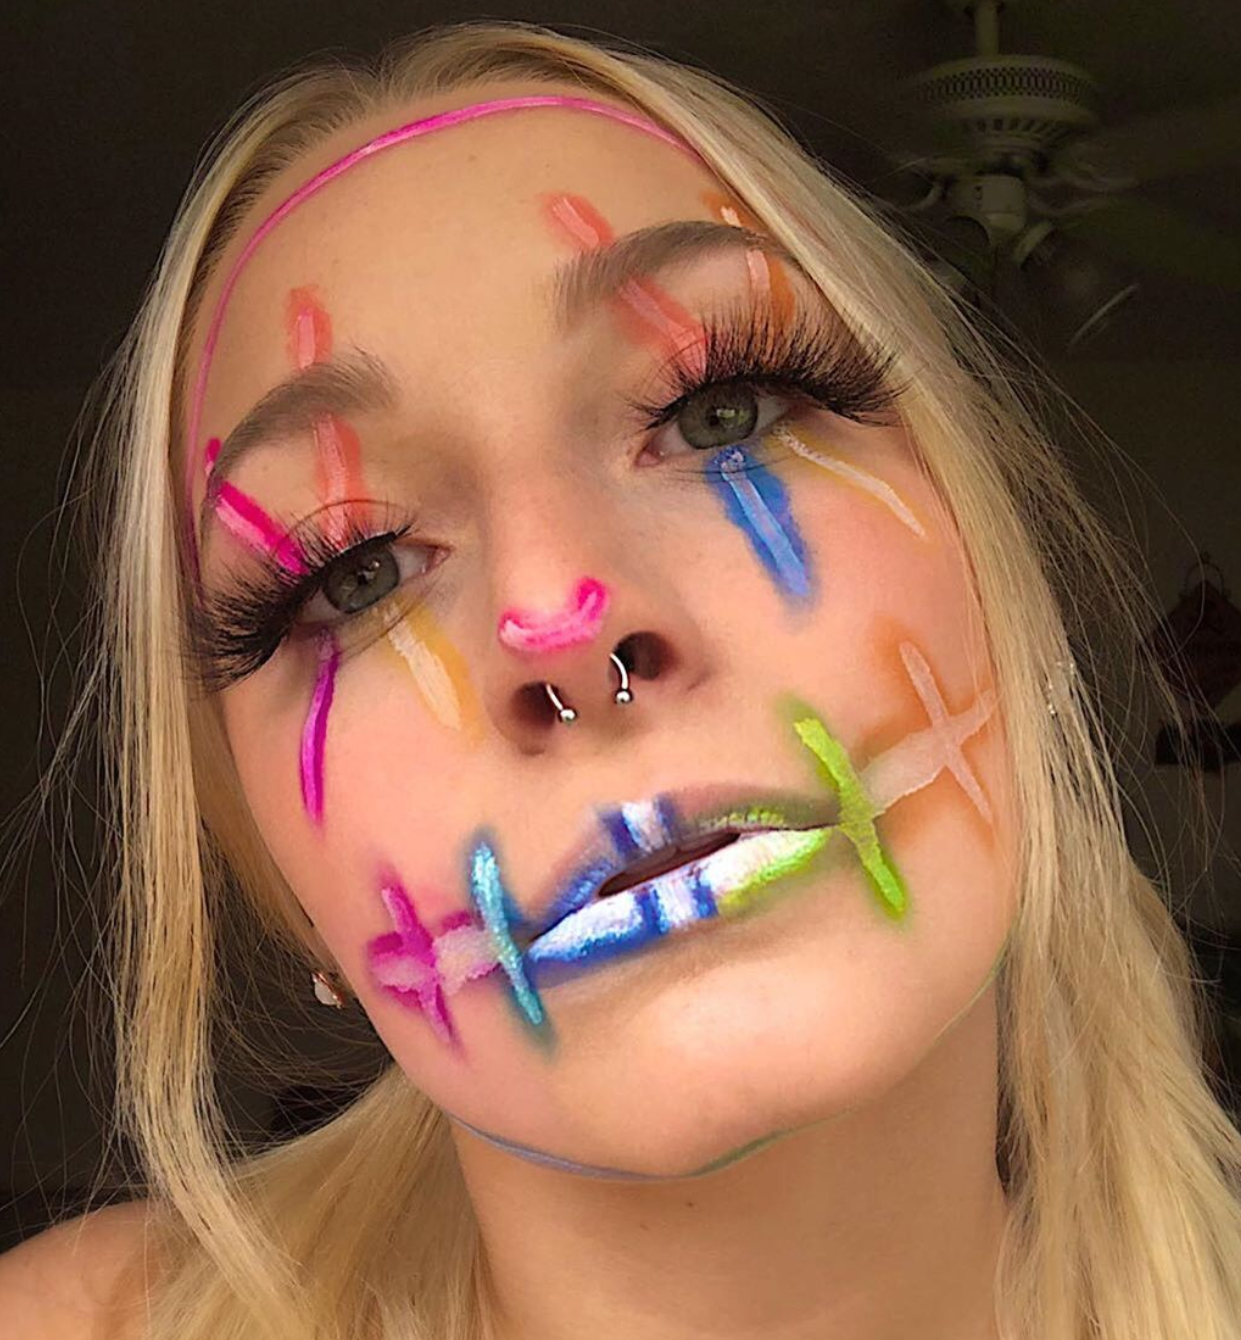 A girl wears neon makeup for her Purge costume.